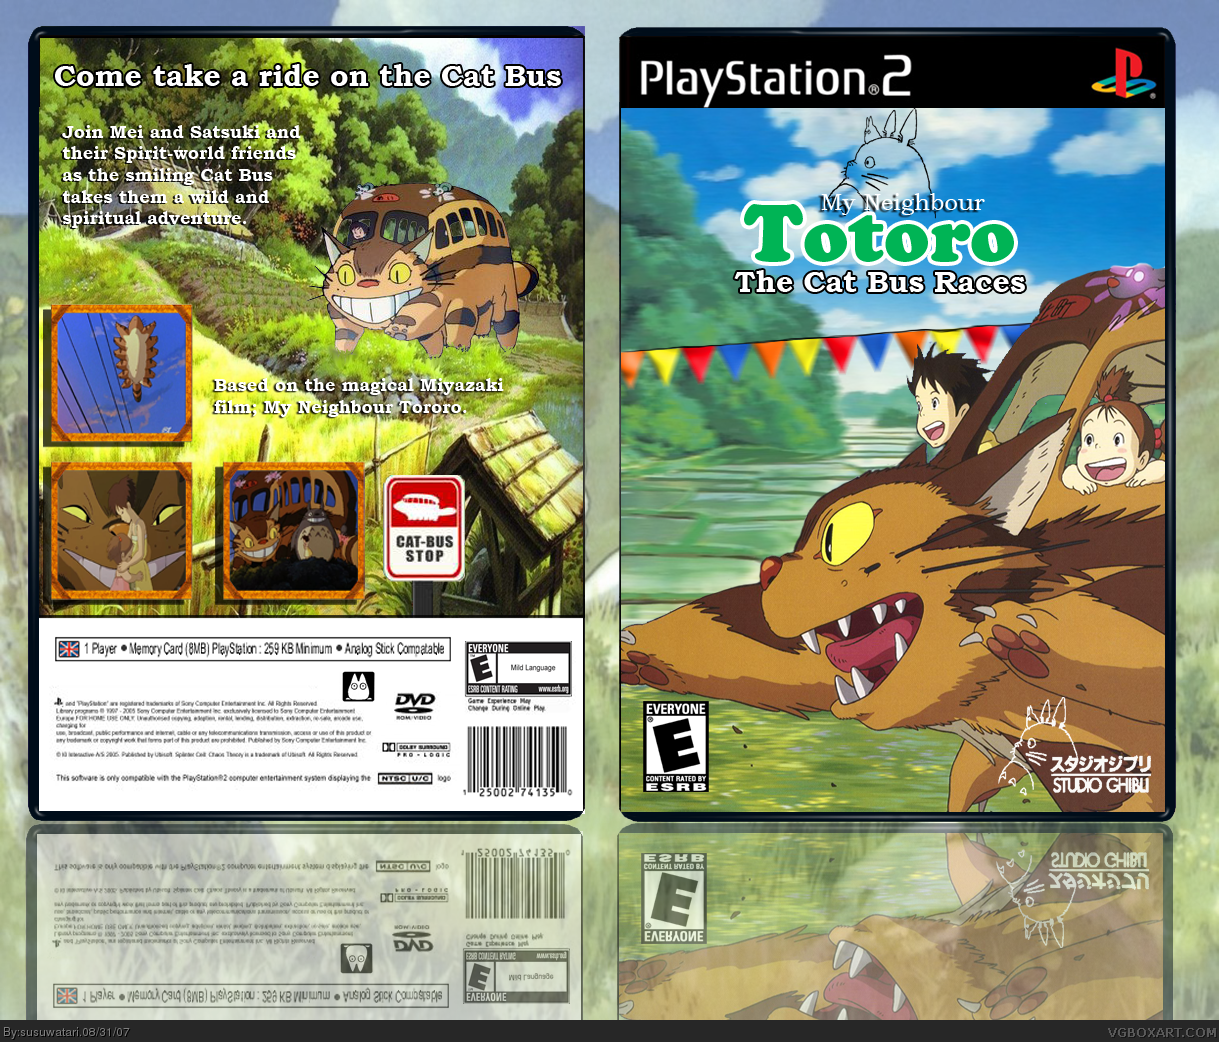 My Neighbour Totoro: The Cat Bus Races box cover